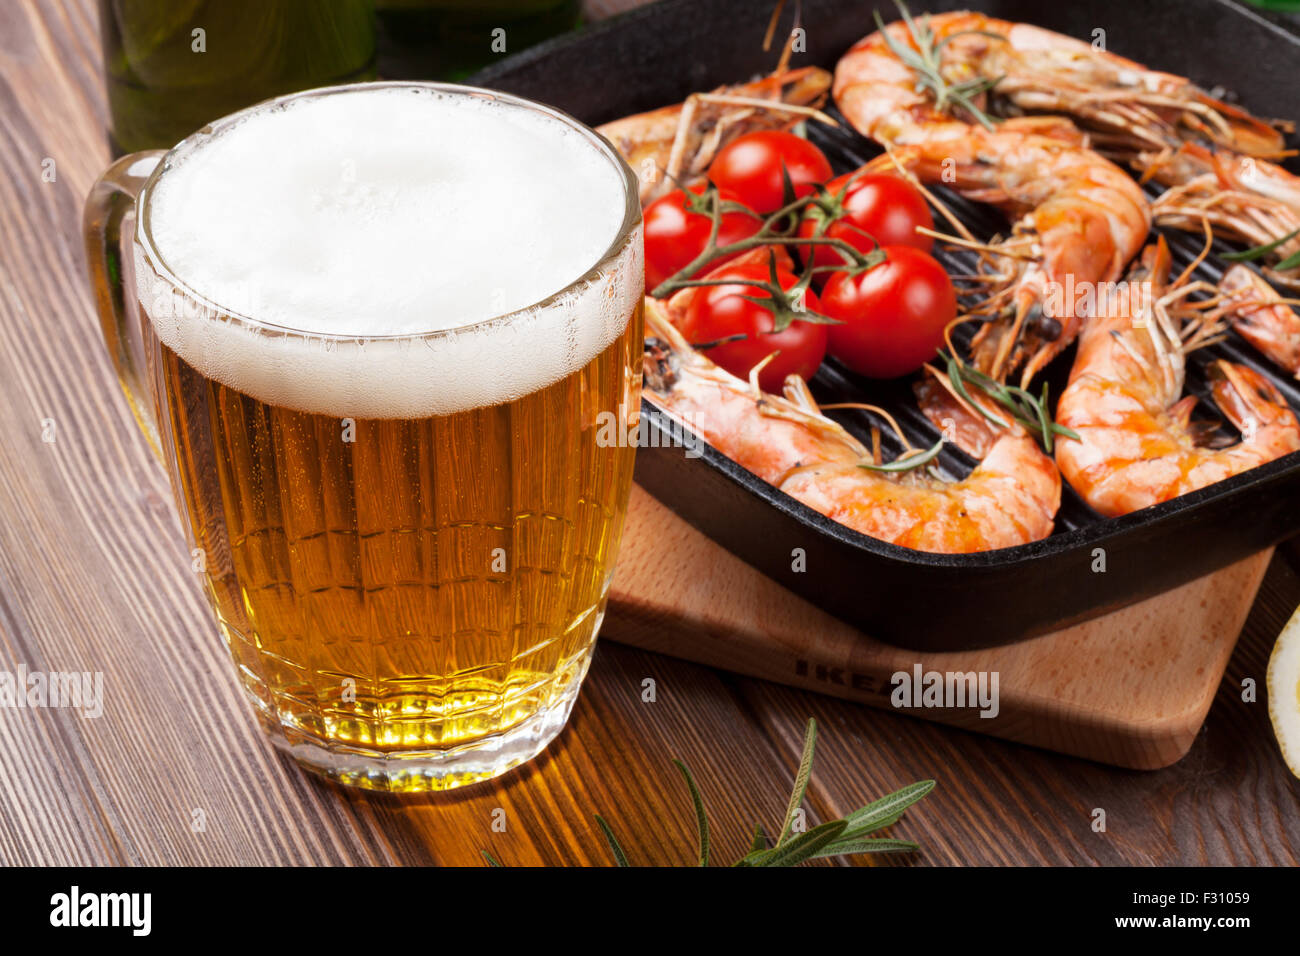 Beer mug and grilled shrimps on wooden table Stock Photo